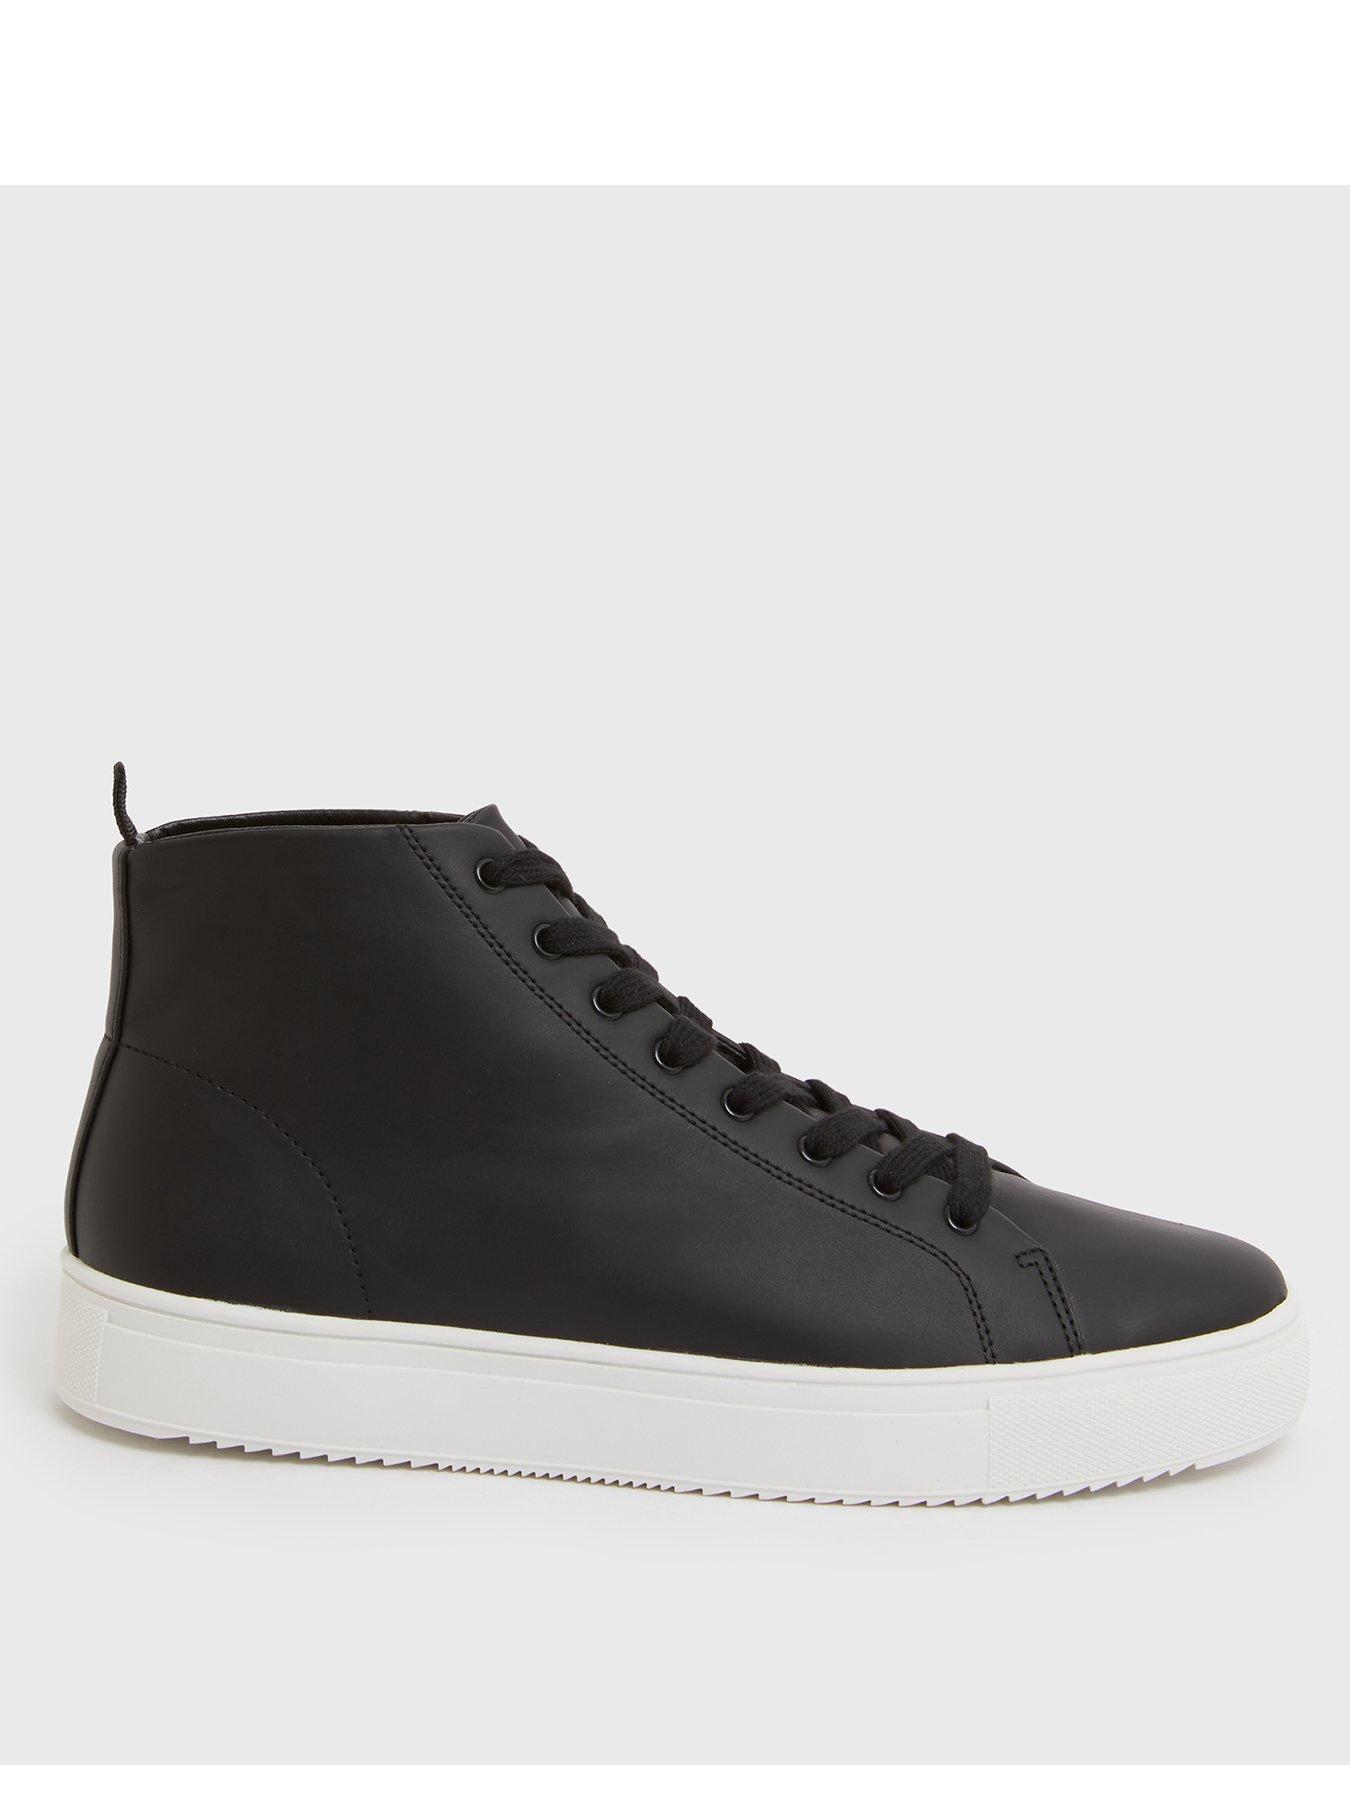  High Top Trainers - Black